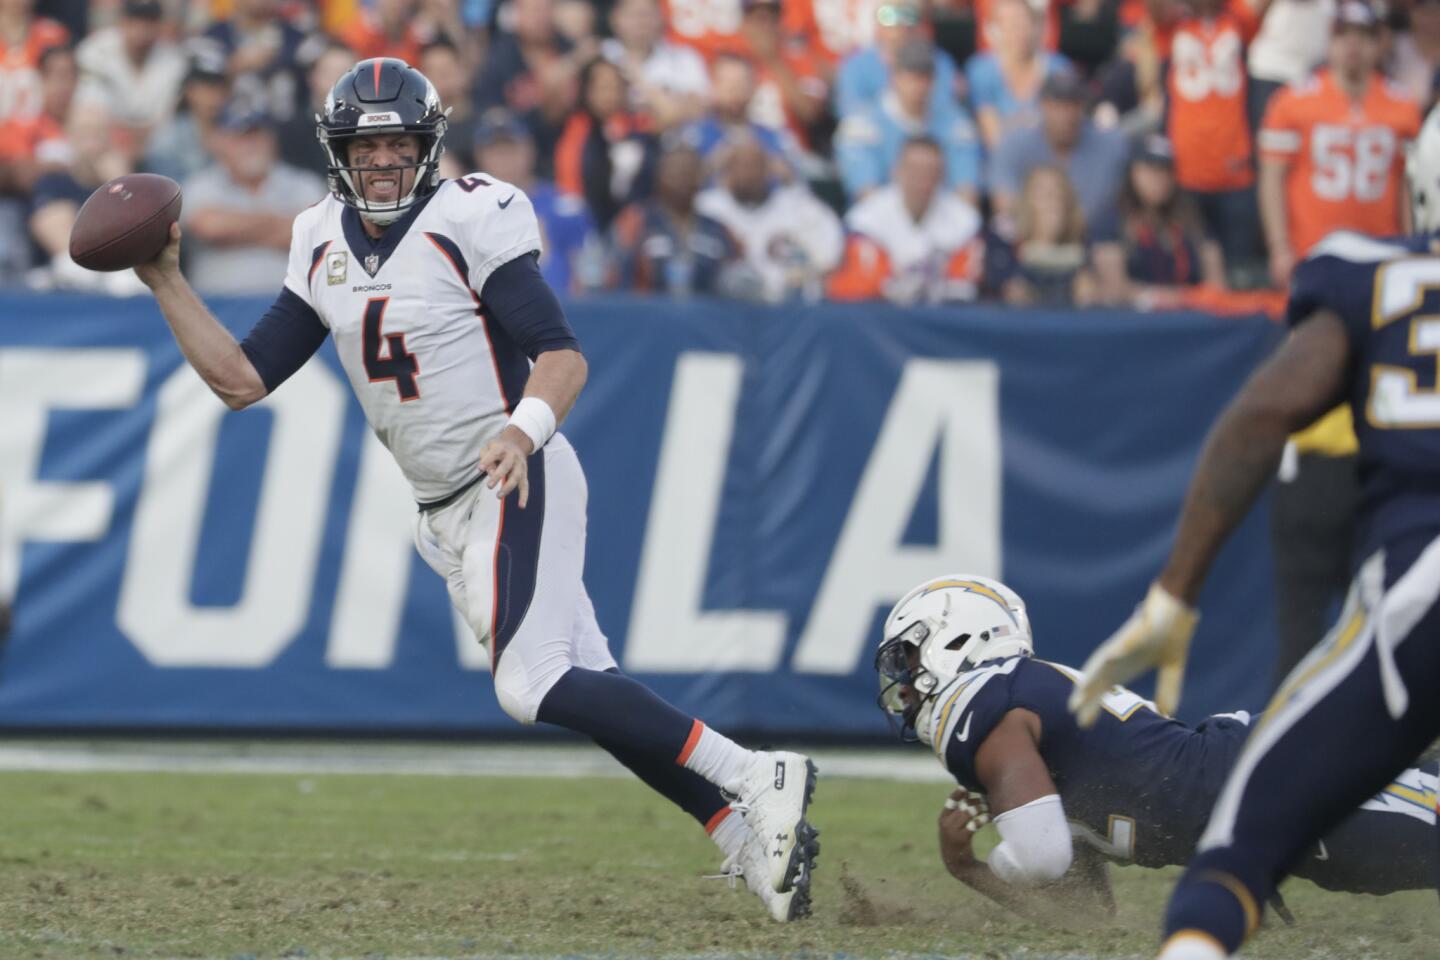 Denver Broncos quarterback Case Keenum throws an incomplete pass as he avoids a sack by Chargers linebacker Uchenna Nwoso late in the fourth quarter at Stubhub Center.